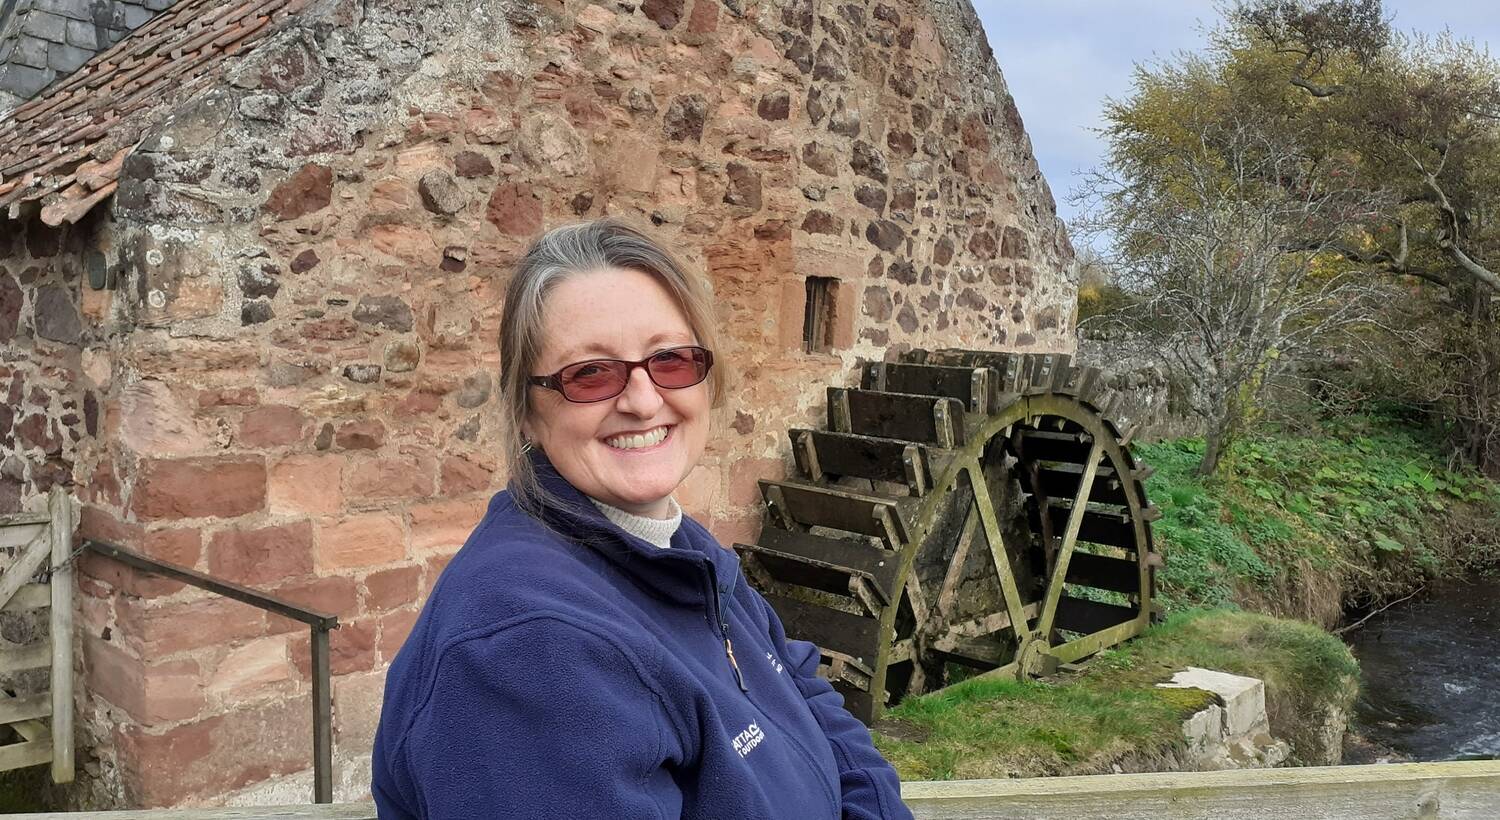 A smiling woman wearing a navy fleece jacket stands beside a water wheel at the side of an old mill building.